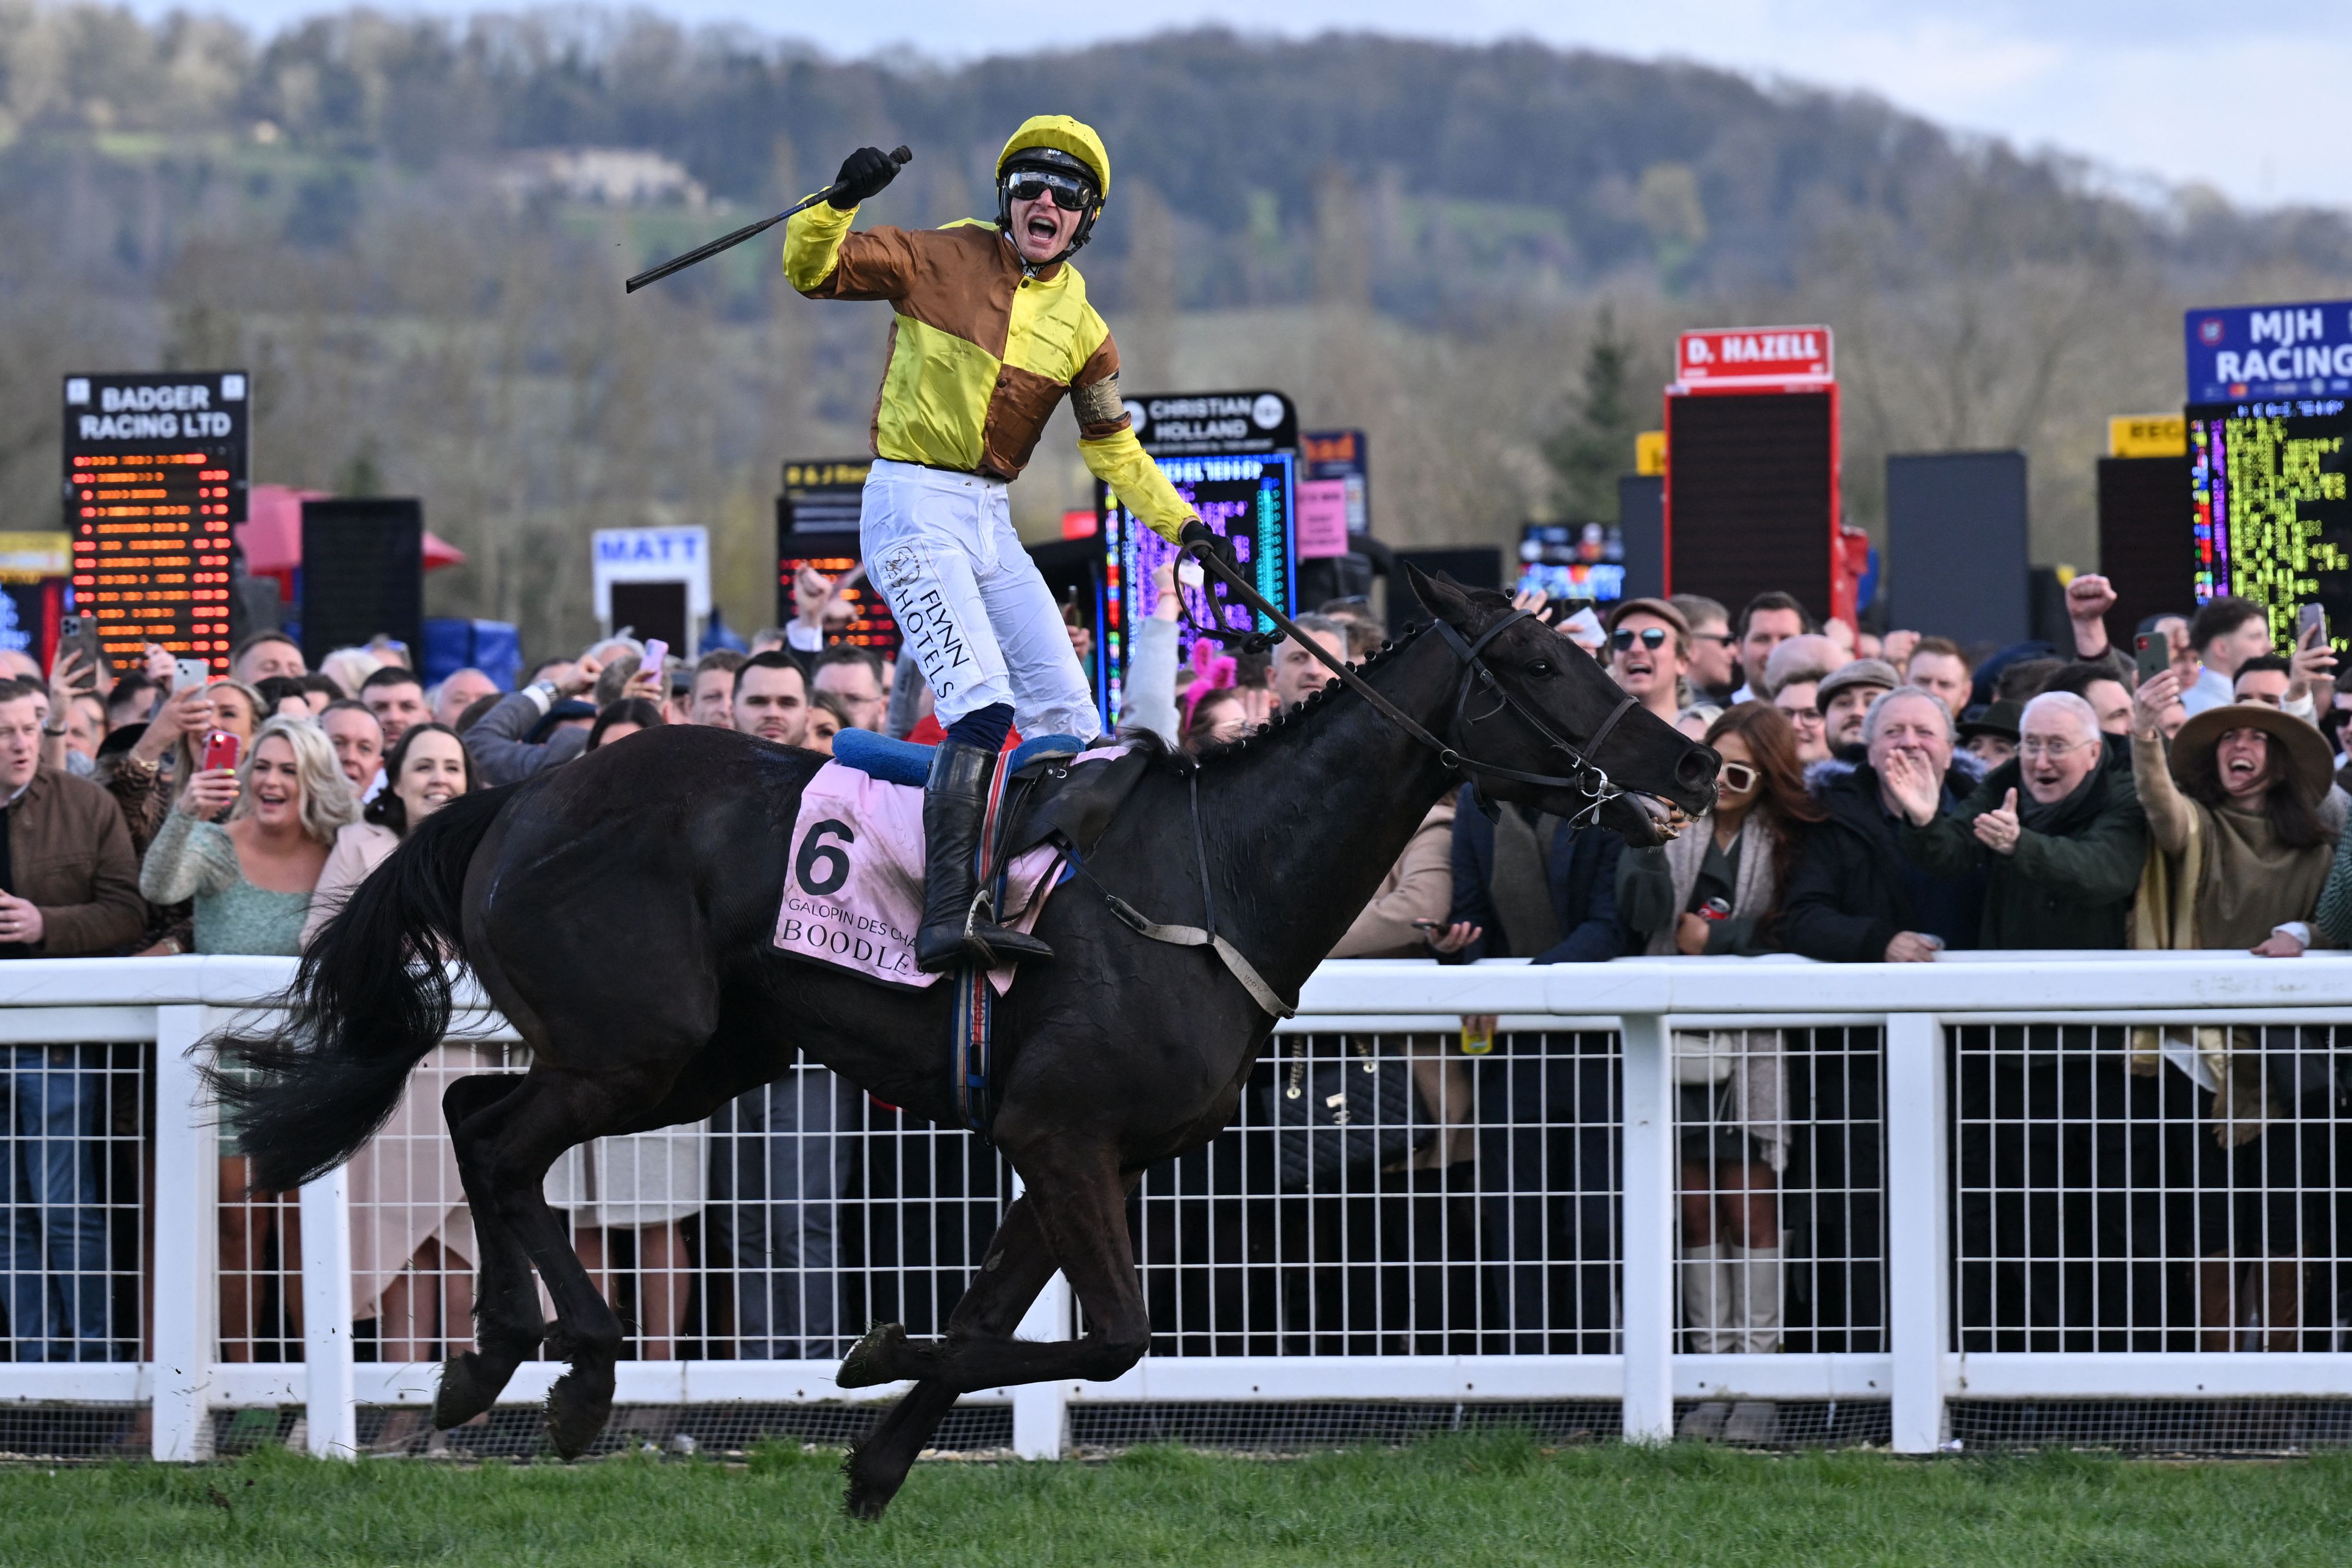 Galopin Des Champs will be one of the stars on show at Cheltenham Festival